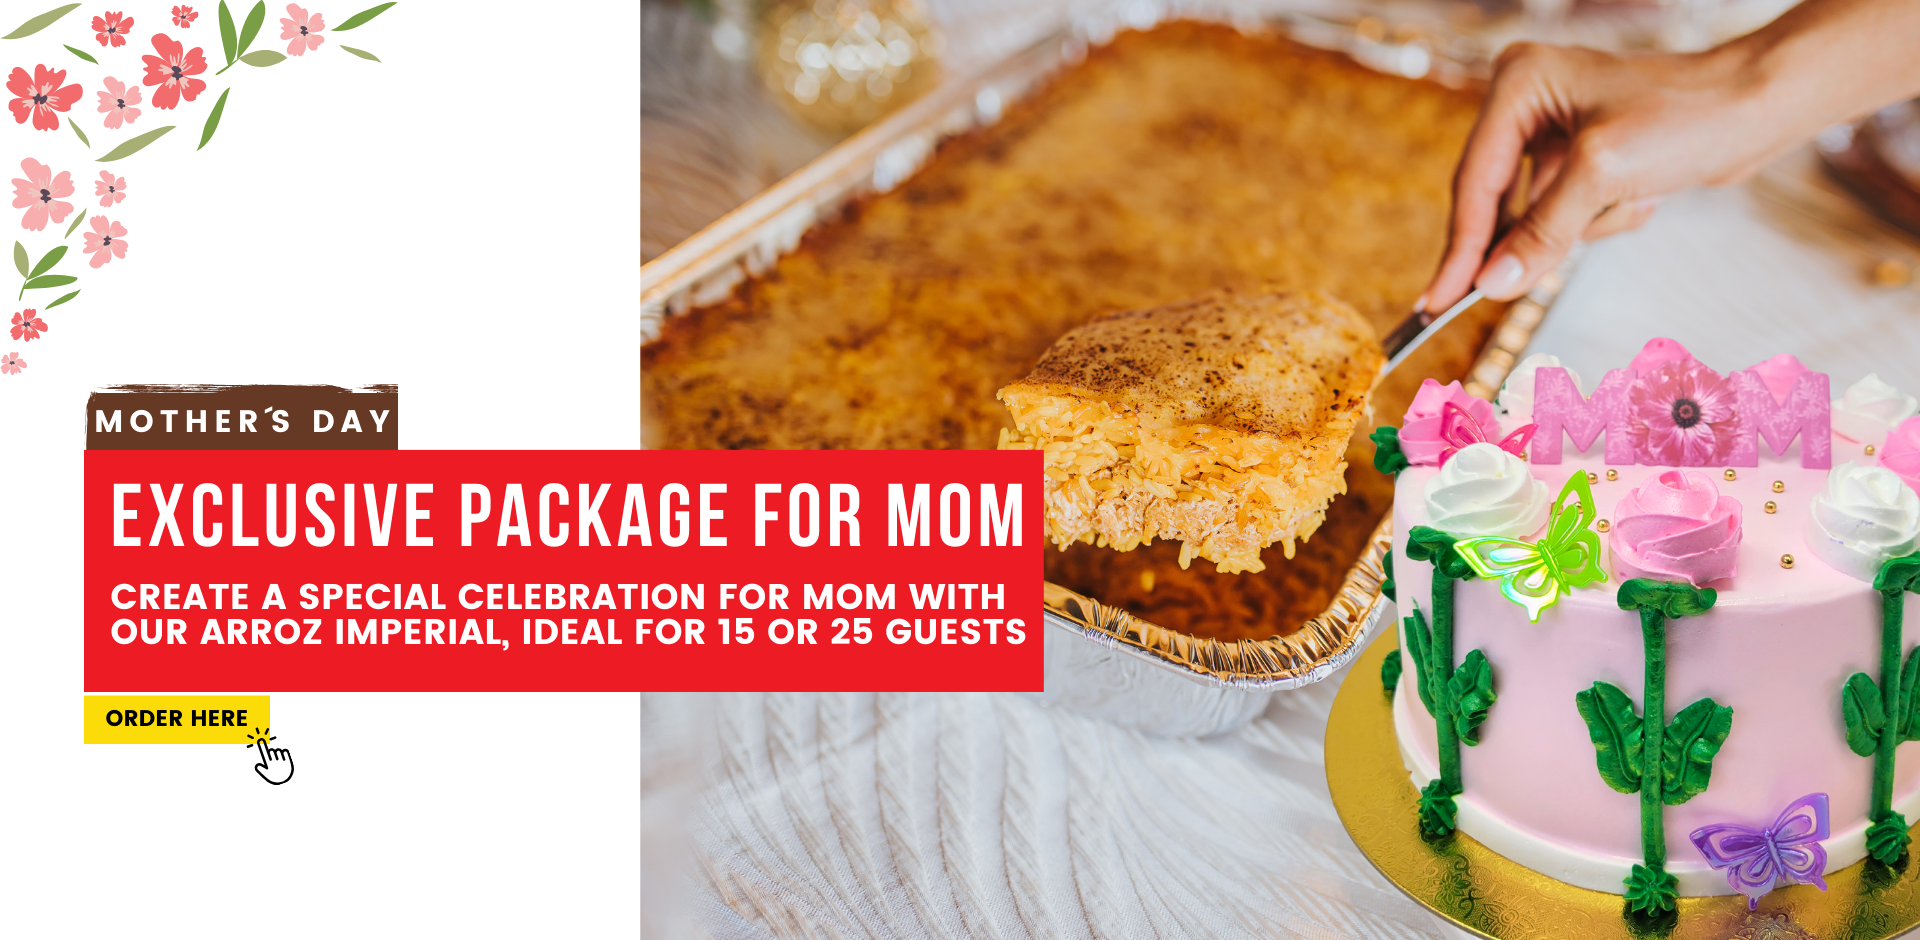 Mother's Day. Exclusive package for mom. Create a special celebration for mom with our arroz Imperial, ideal for 15 or 25 guests. Order here